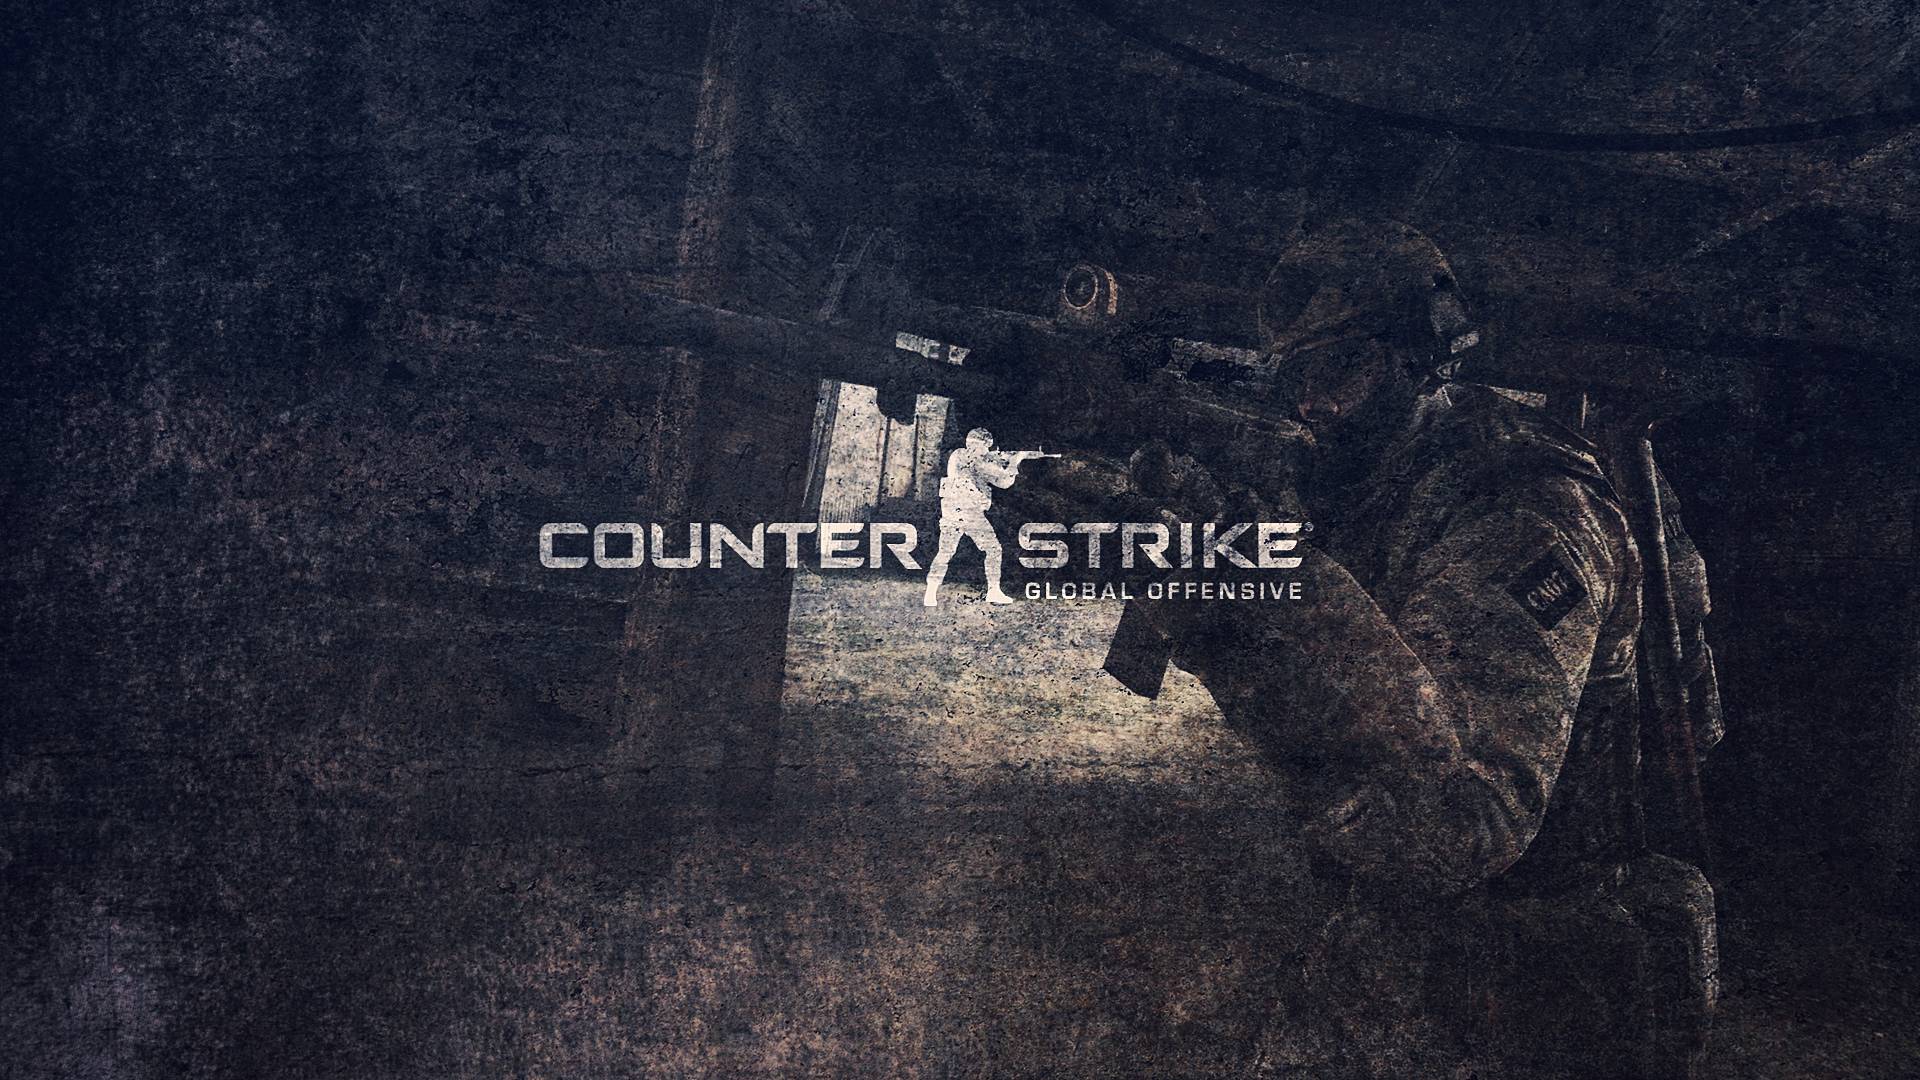 Counter Strike Global Offensive Wallpapers Wallpaper Cave